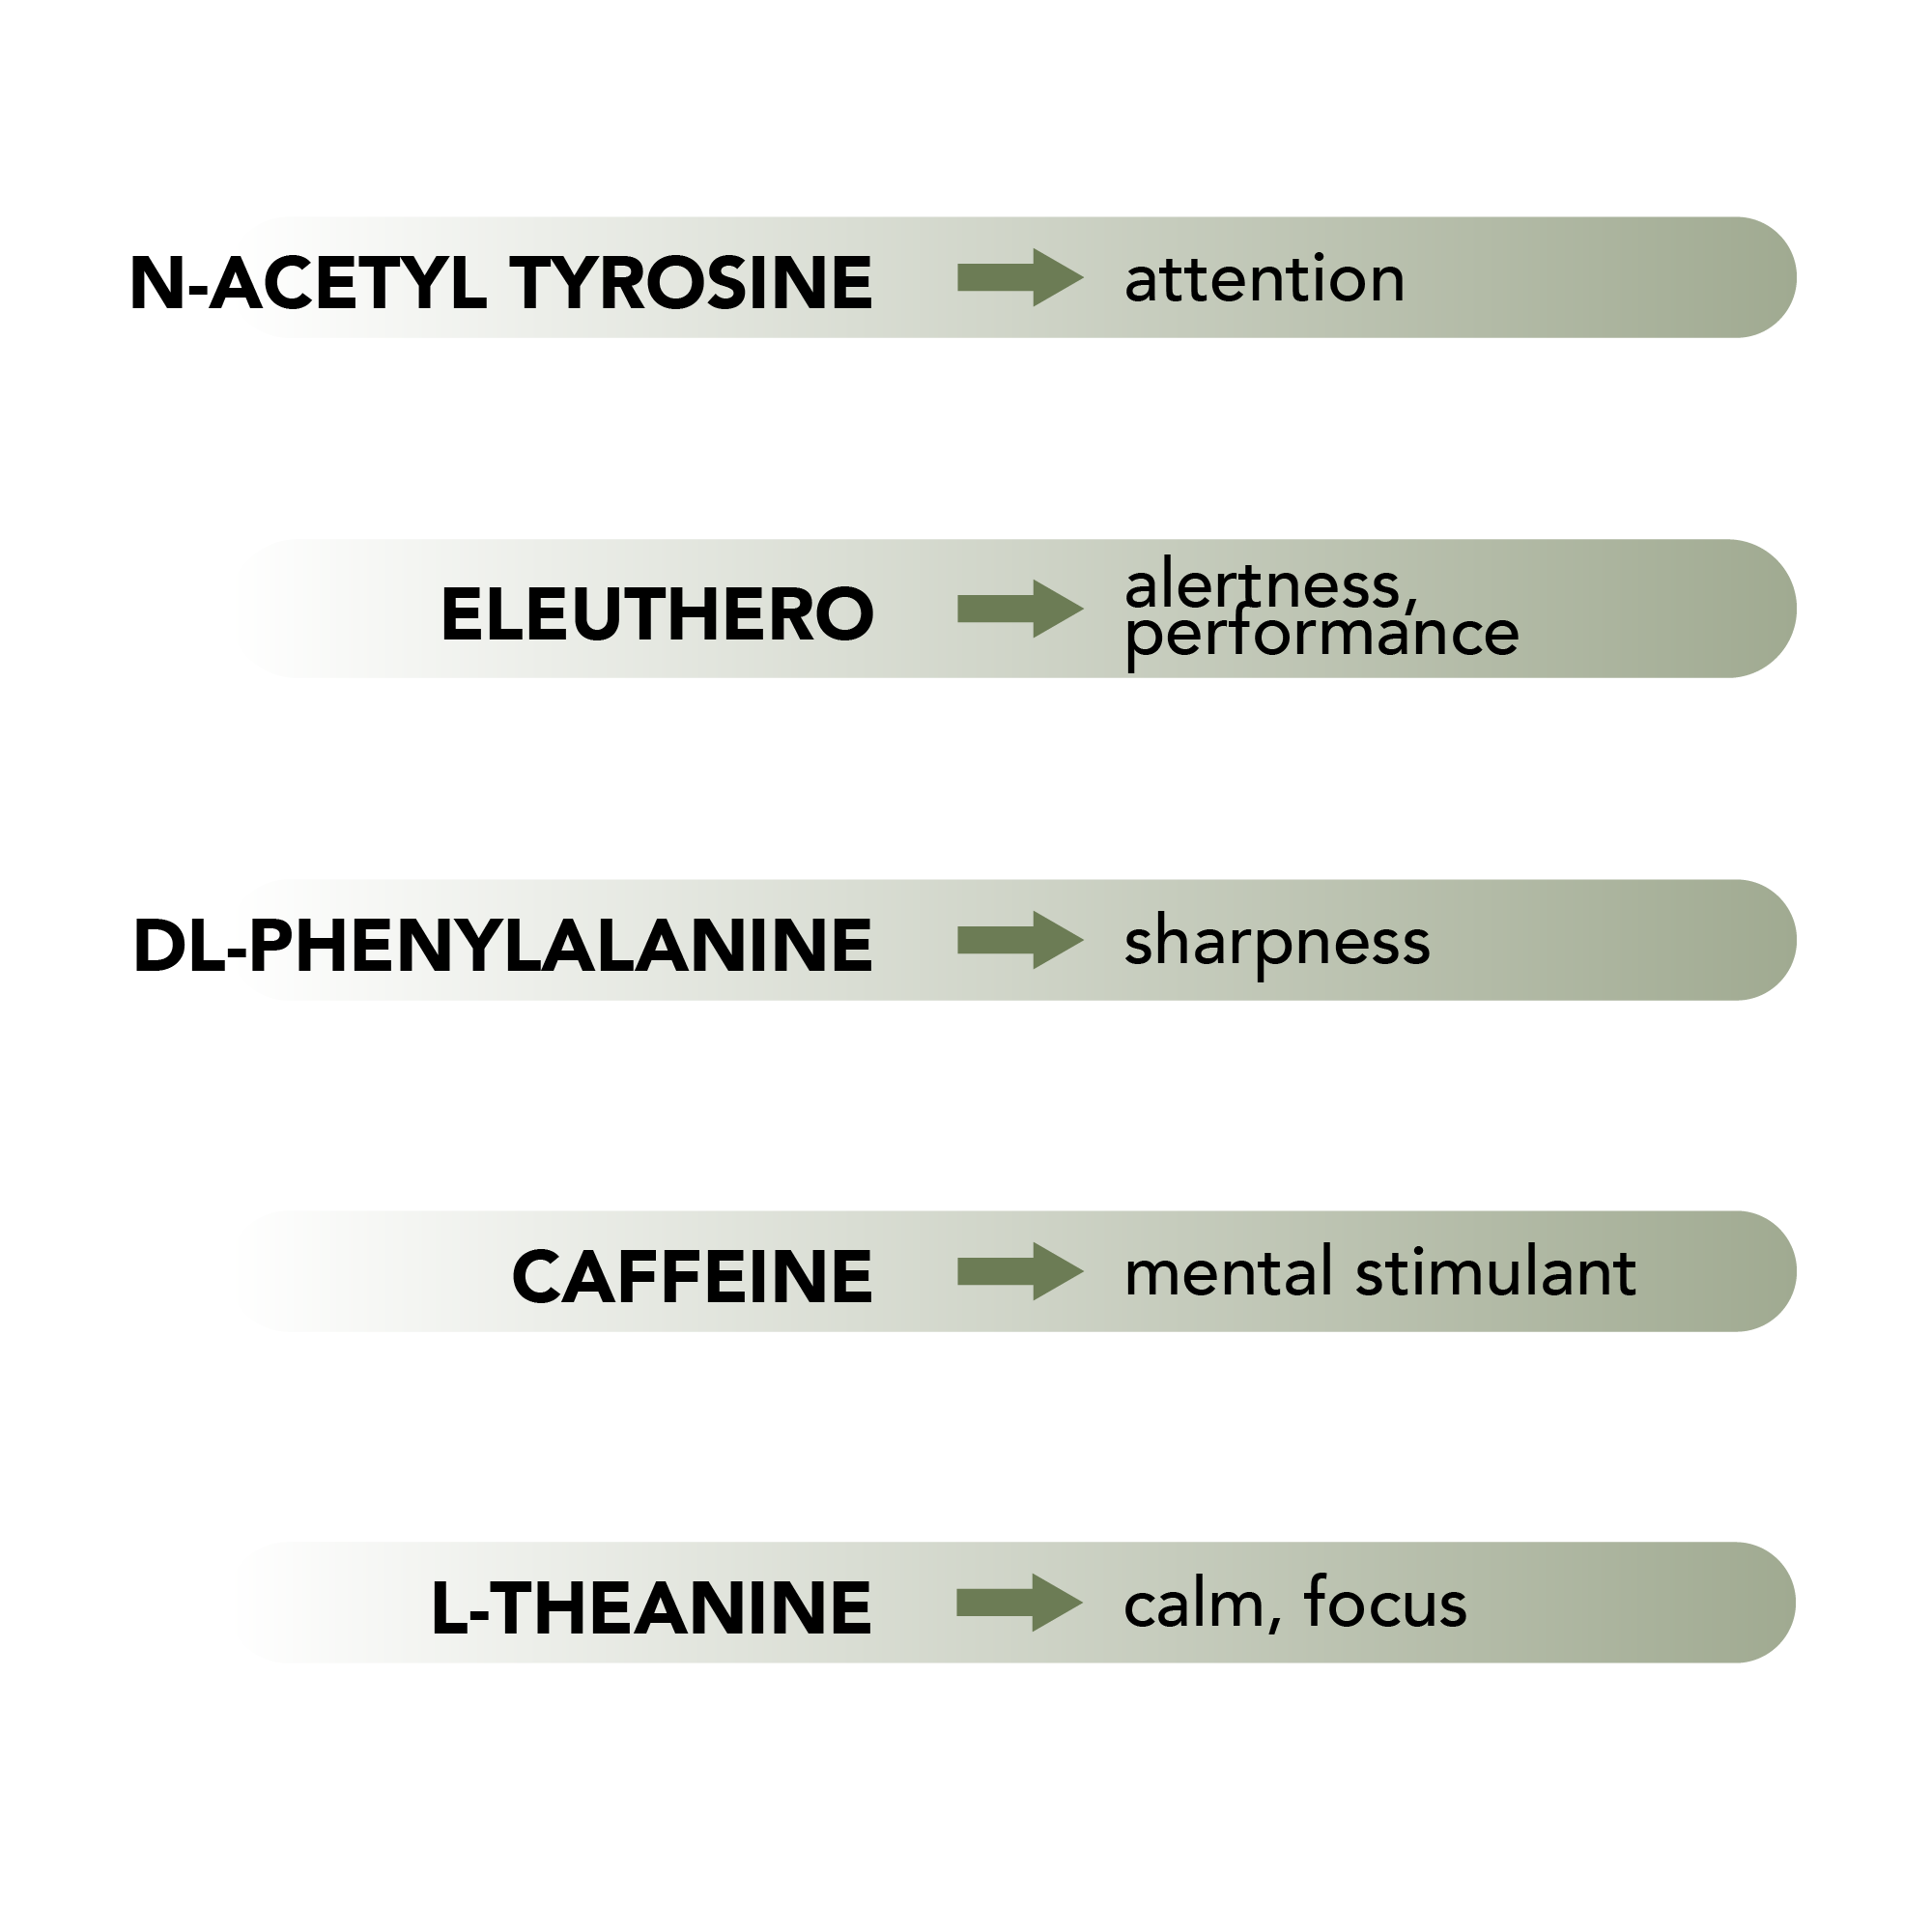 List of balancer/supplement ingredients and how they improve your mental and physical status. N-Acetyl Tyrosine improves attention, Caffeine is a mental stimulant, Siberian Ginseng improves alertness and performance, DL-Phenylalanine improves mental sharpness, L-Theanine creates calm and focus.